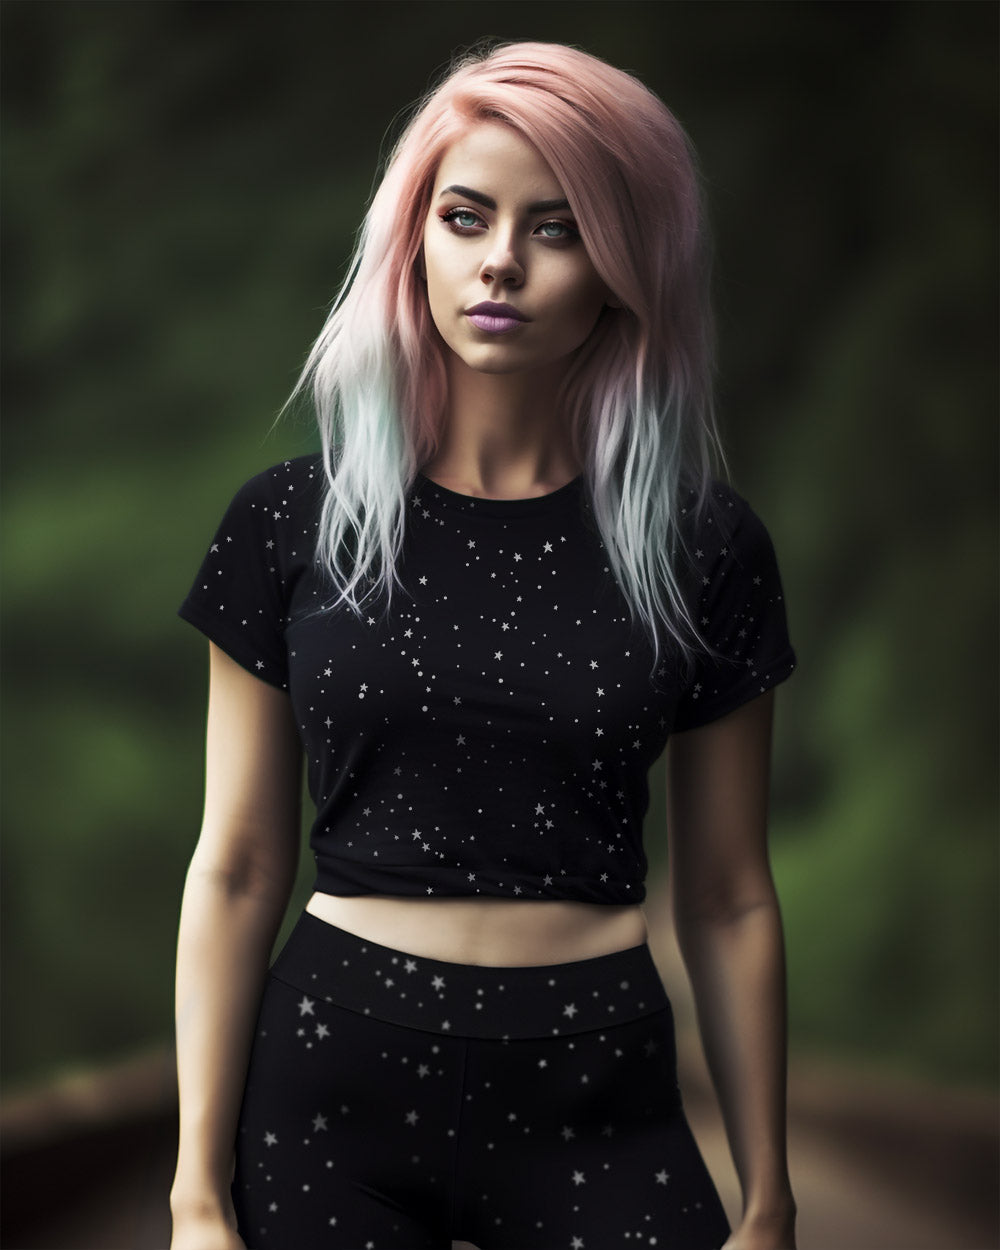 Starry Night Crop Top - Vegan Gothic Fashion - Dark Academia Alt Clothing - Alternative Occult Ethical Style - On Demand Sustainable Product